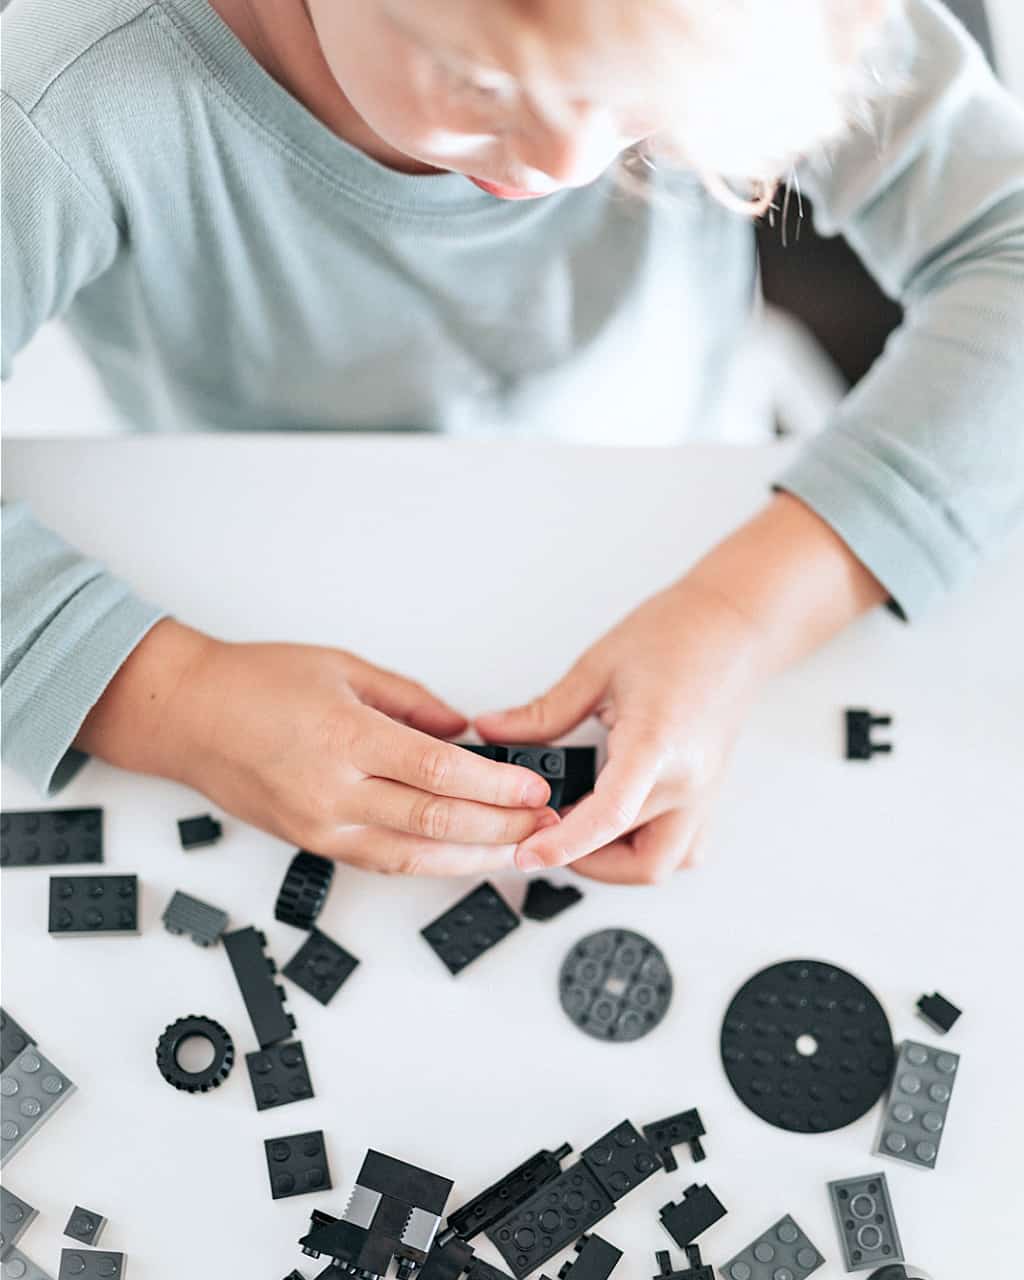 A boy playing with his favorite minimalist toys, LEGOs